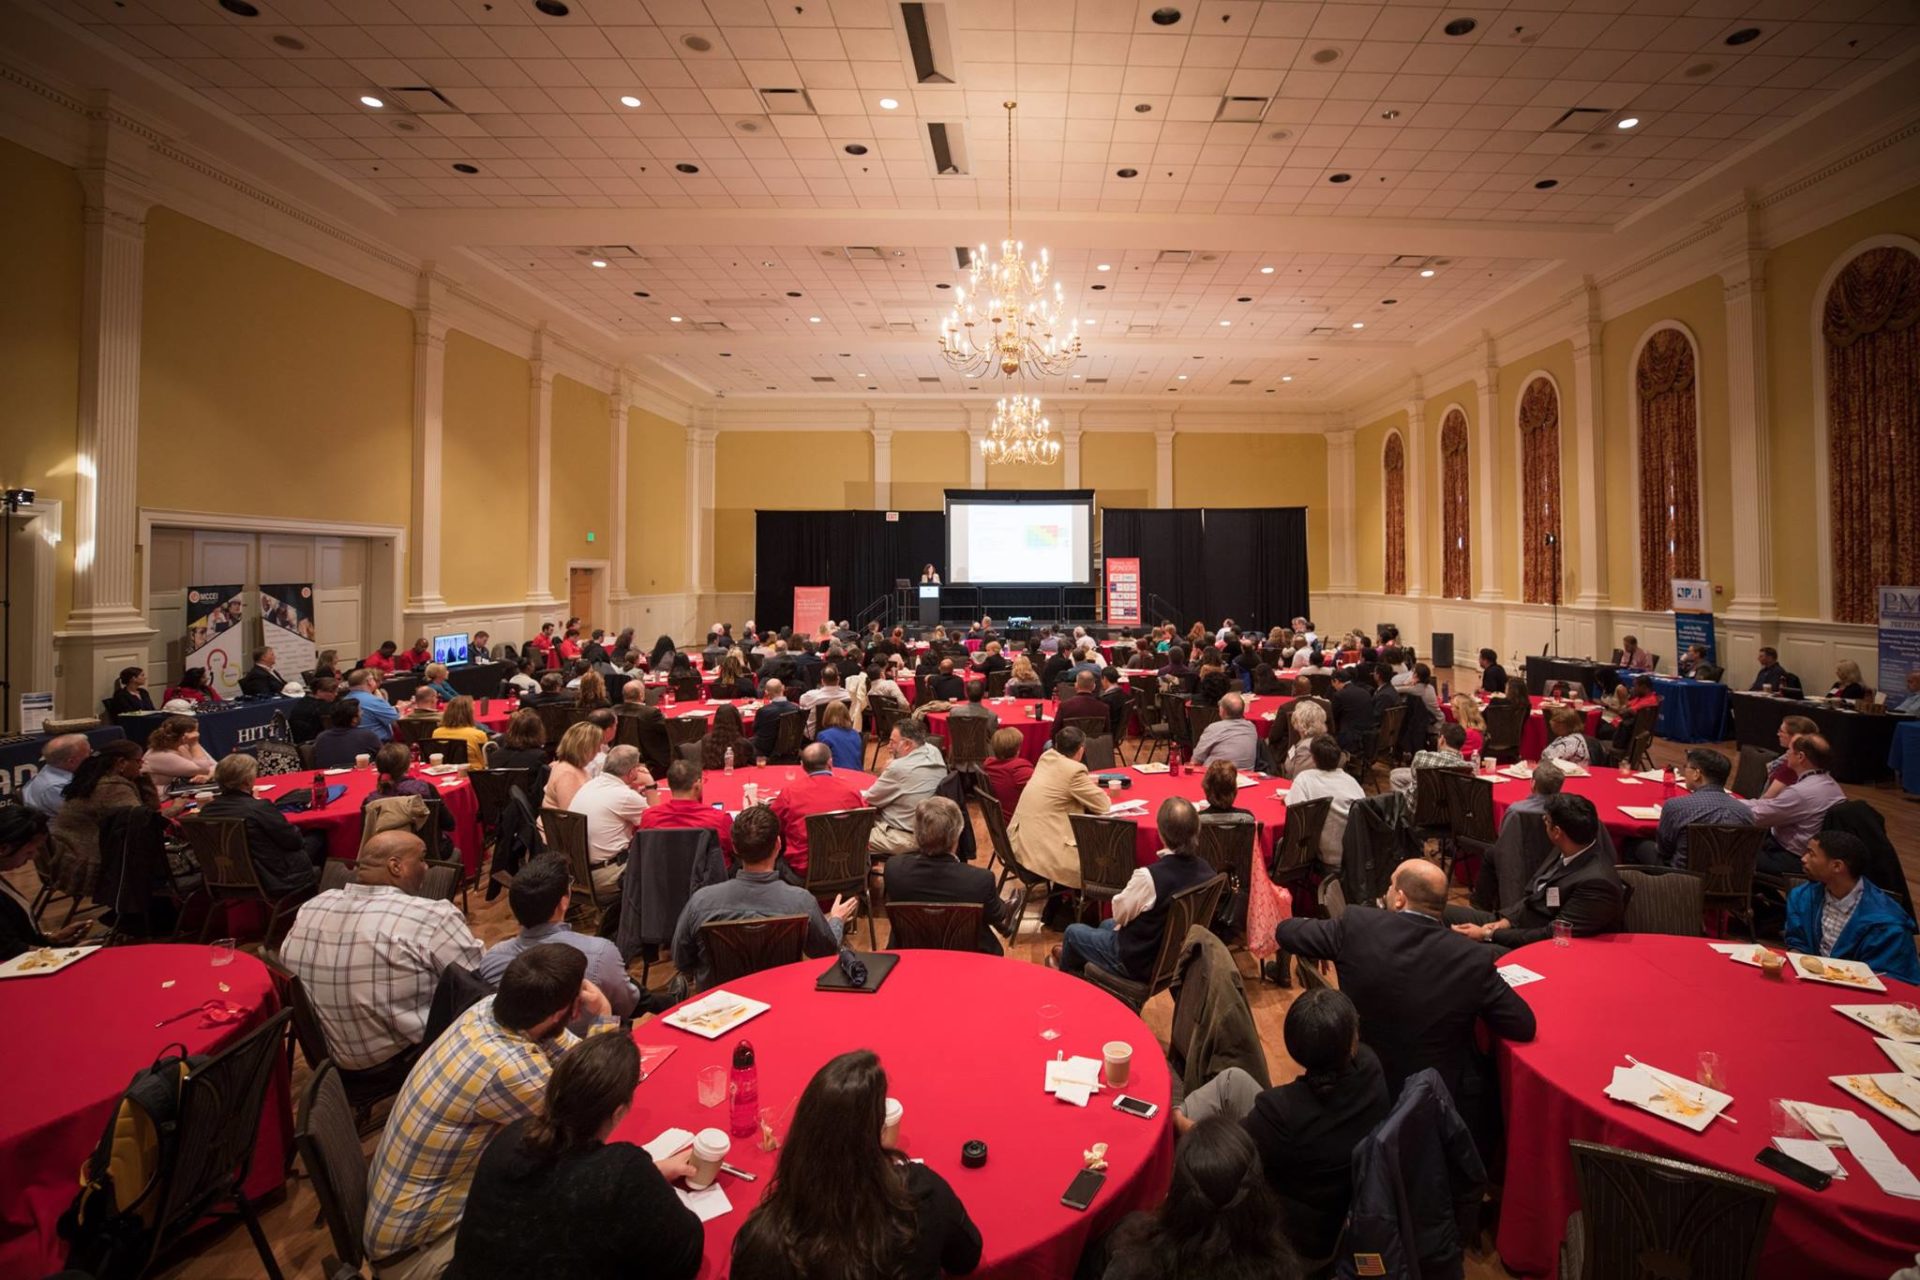 Round tables with red tablecloths in the main ballroom of the 2017 UMD PM conference with participants seated around each table.